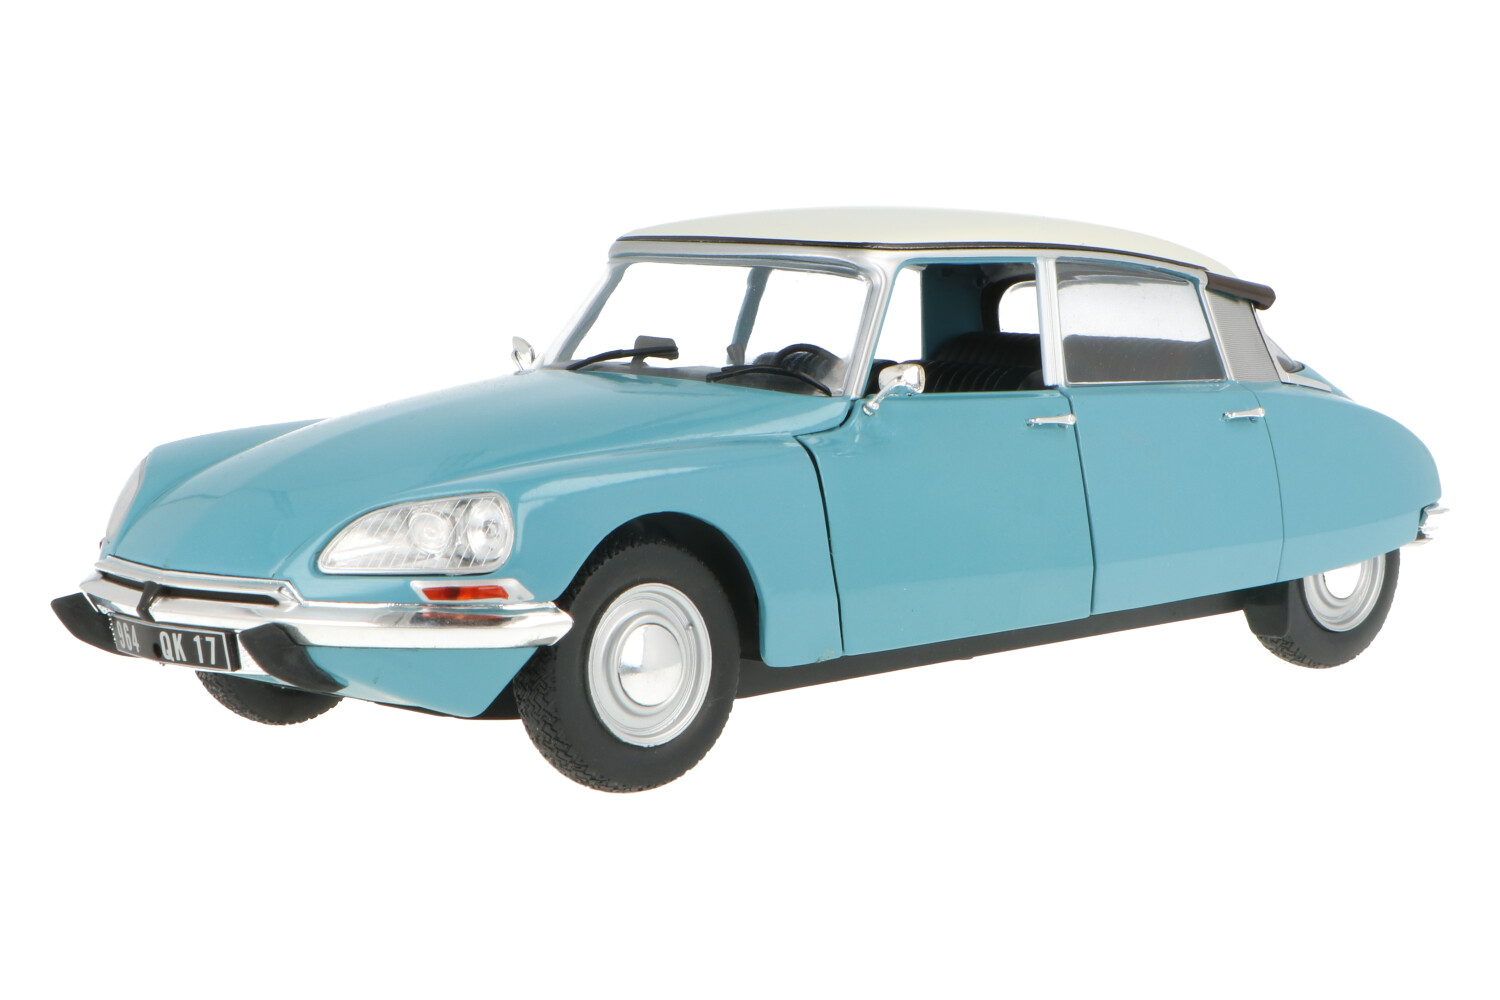 Citroen-DS-Special-S1800701_13153663506001970Citroen-DS-Special-S1800701_Houseofmodelcars_.jpg